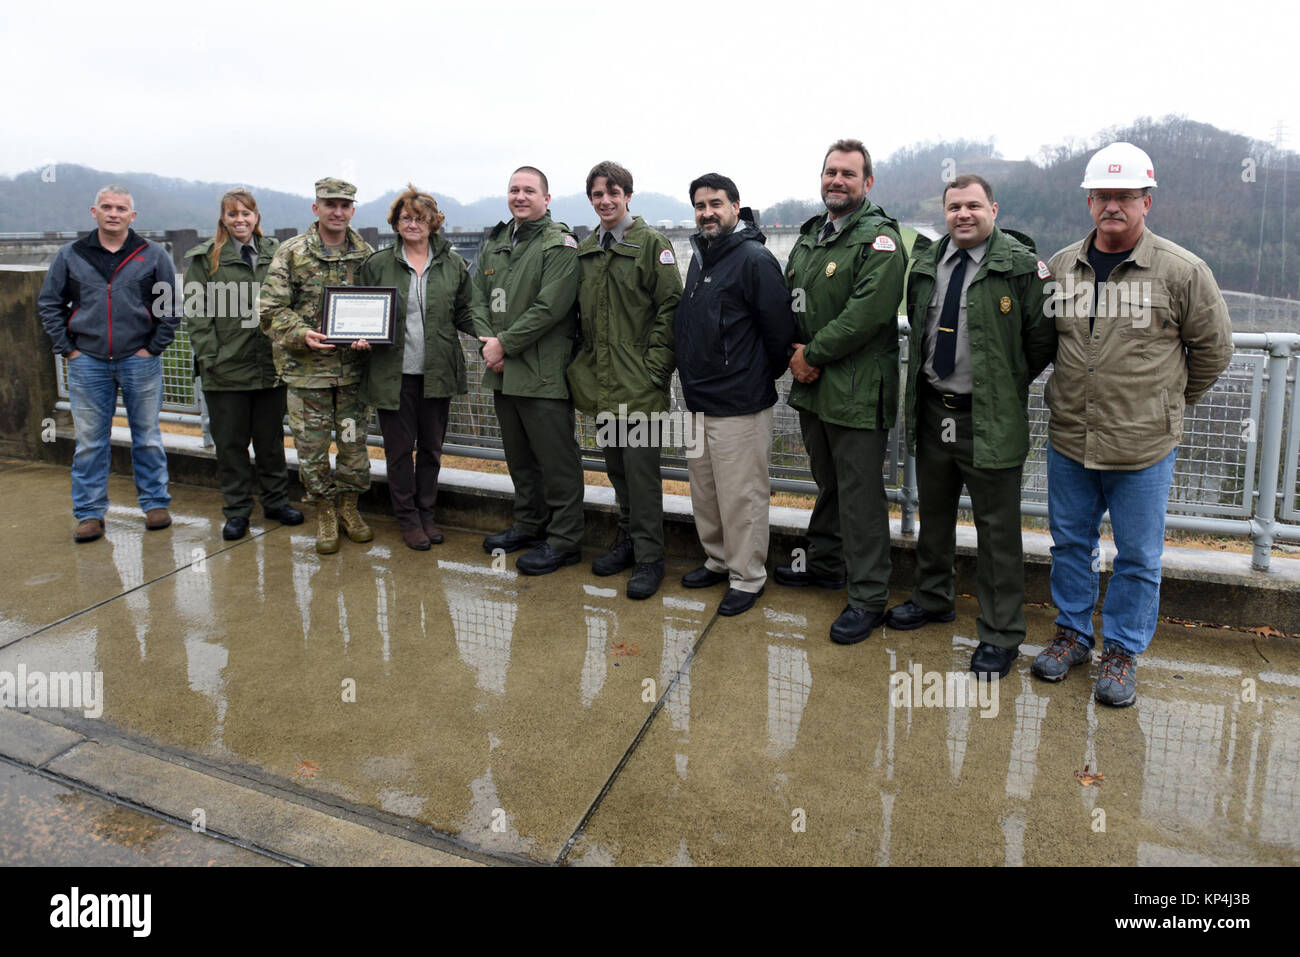 Col. Paul Kremer, U.S. Army Corps of Engineers Great Lakes and Ohio River Division acting commander, presents the division’s water safety team award for 2017 to (left to right) Jody Craig, Center Hill Dam superintendent; park ranger Sarah Peace; Teresa Upchurch, administrative assistant, Center Hill Lake Resource manager’s office;  Center Hill Lake park rangers John Malone and Tyler Ferrell, Kevin Salvilla, Center Hill Lake natural resource manager; park rangers Terry Martin and Gary Bruce; Tony Crow, Center Hill Lake facility manager.  The award was presented on behalf of Operations Division  Stock Photo